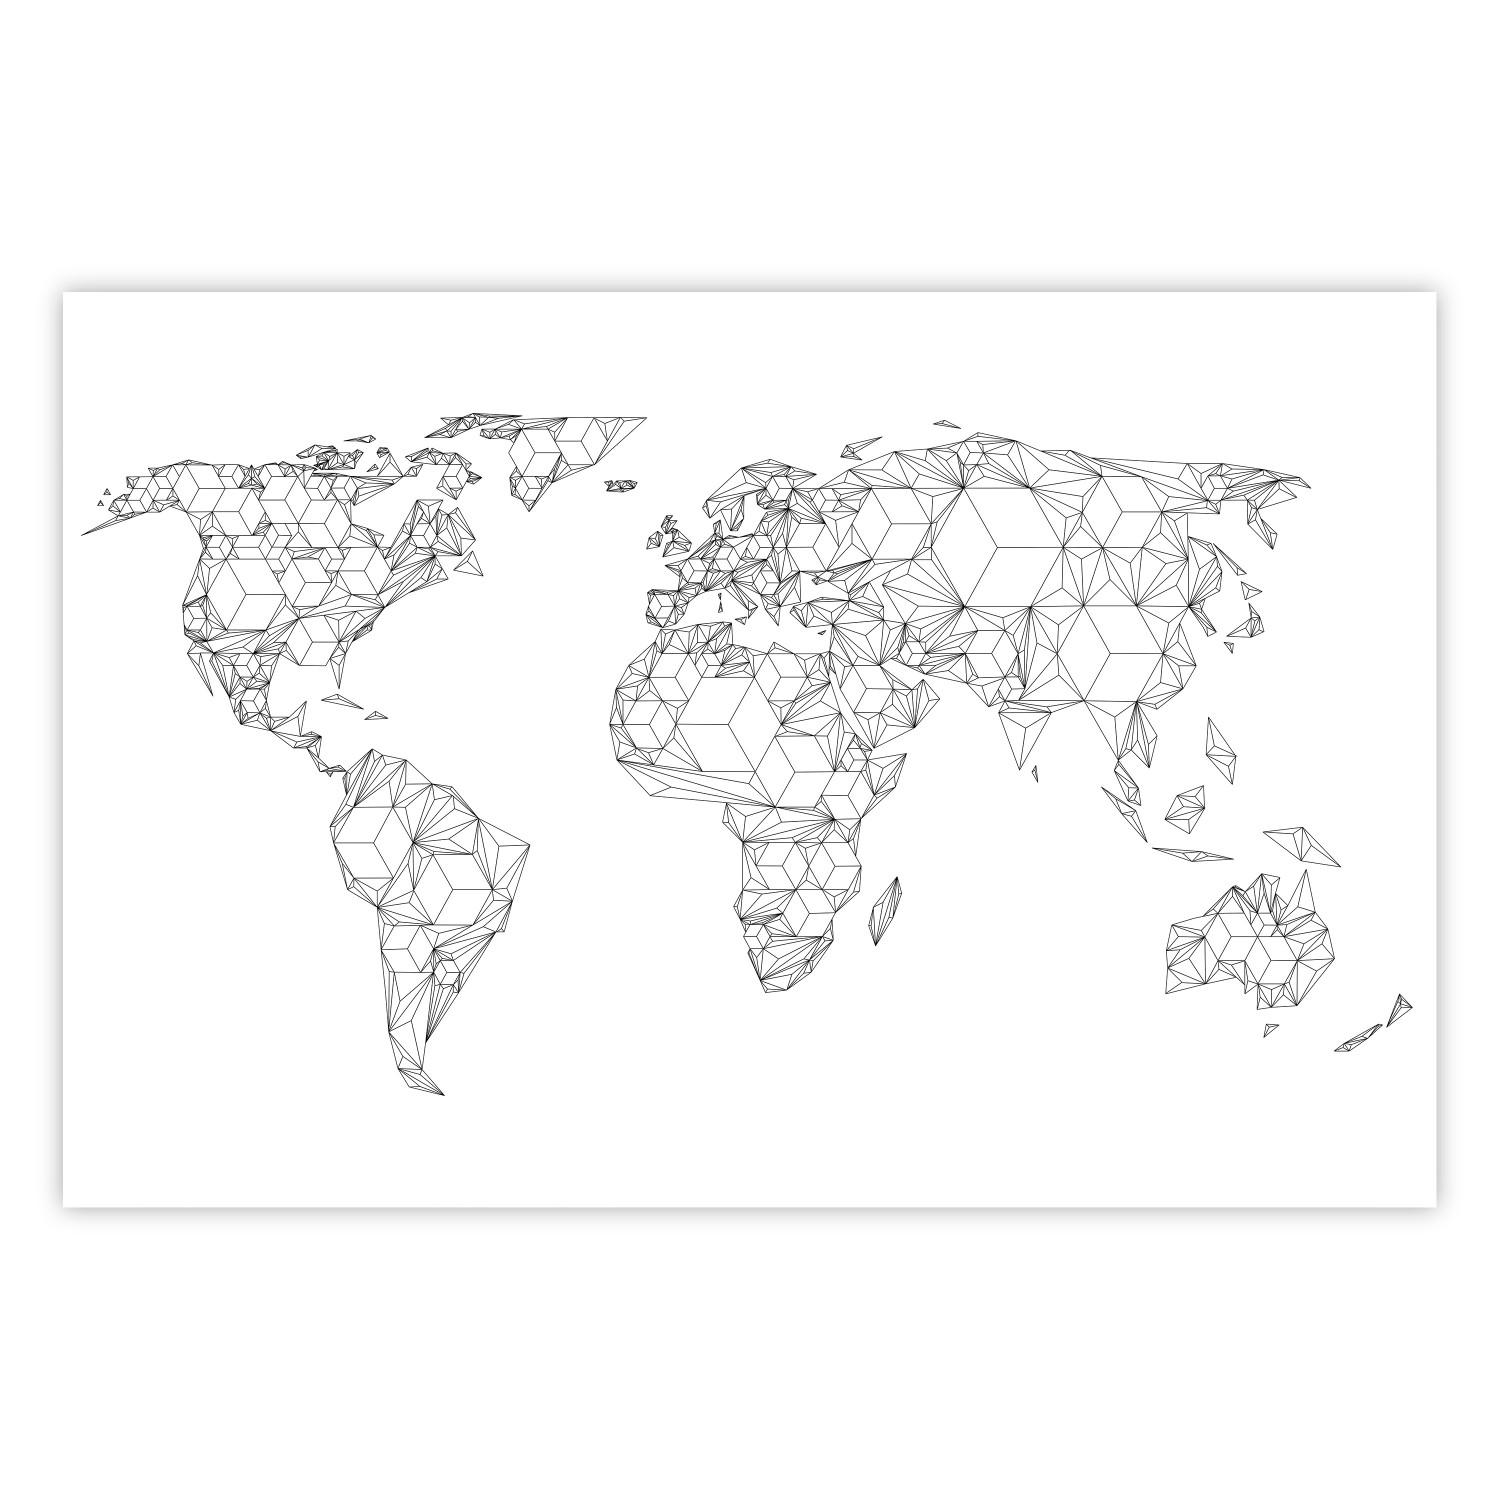 Poster Geometric World Map - continents made up of geometric figures